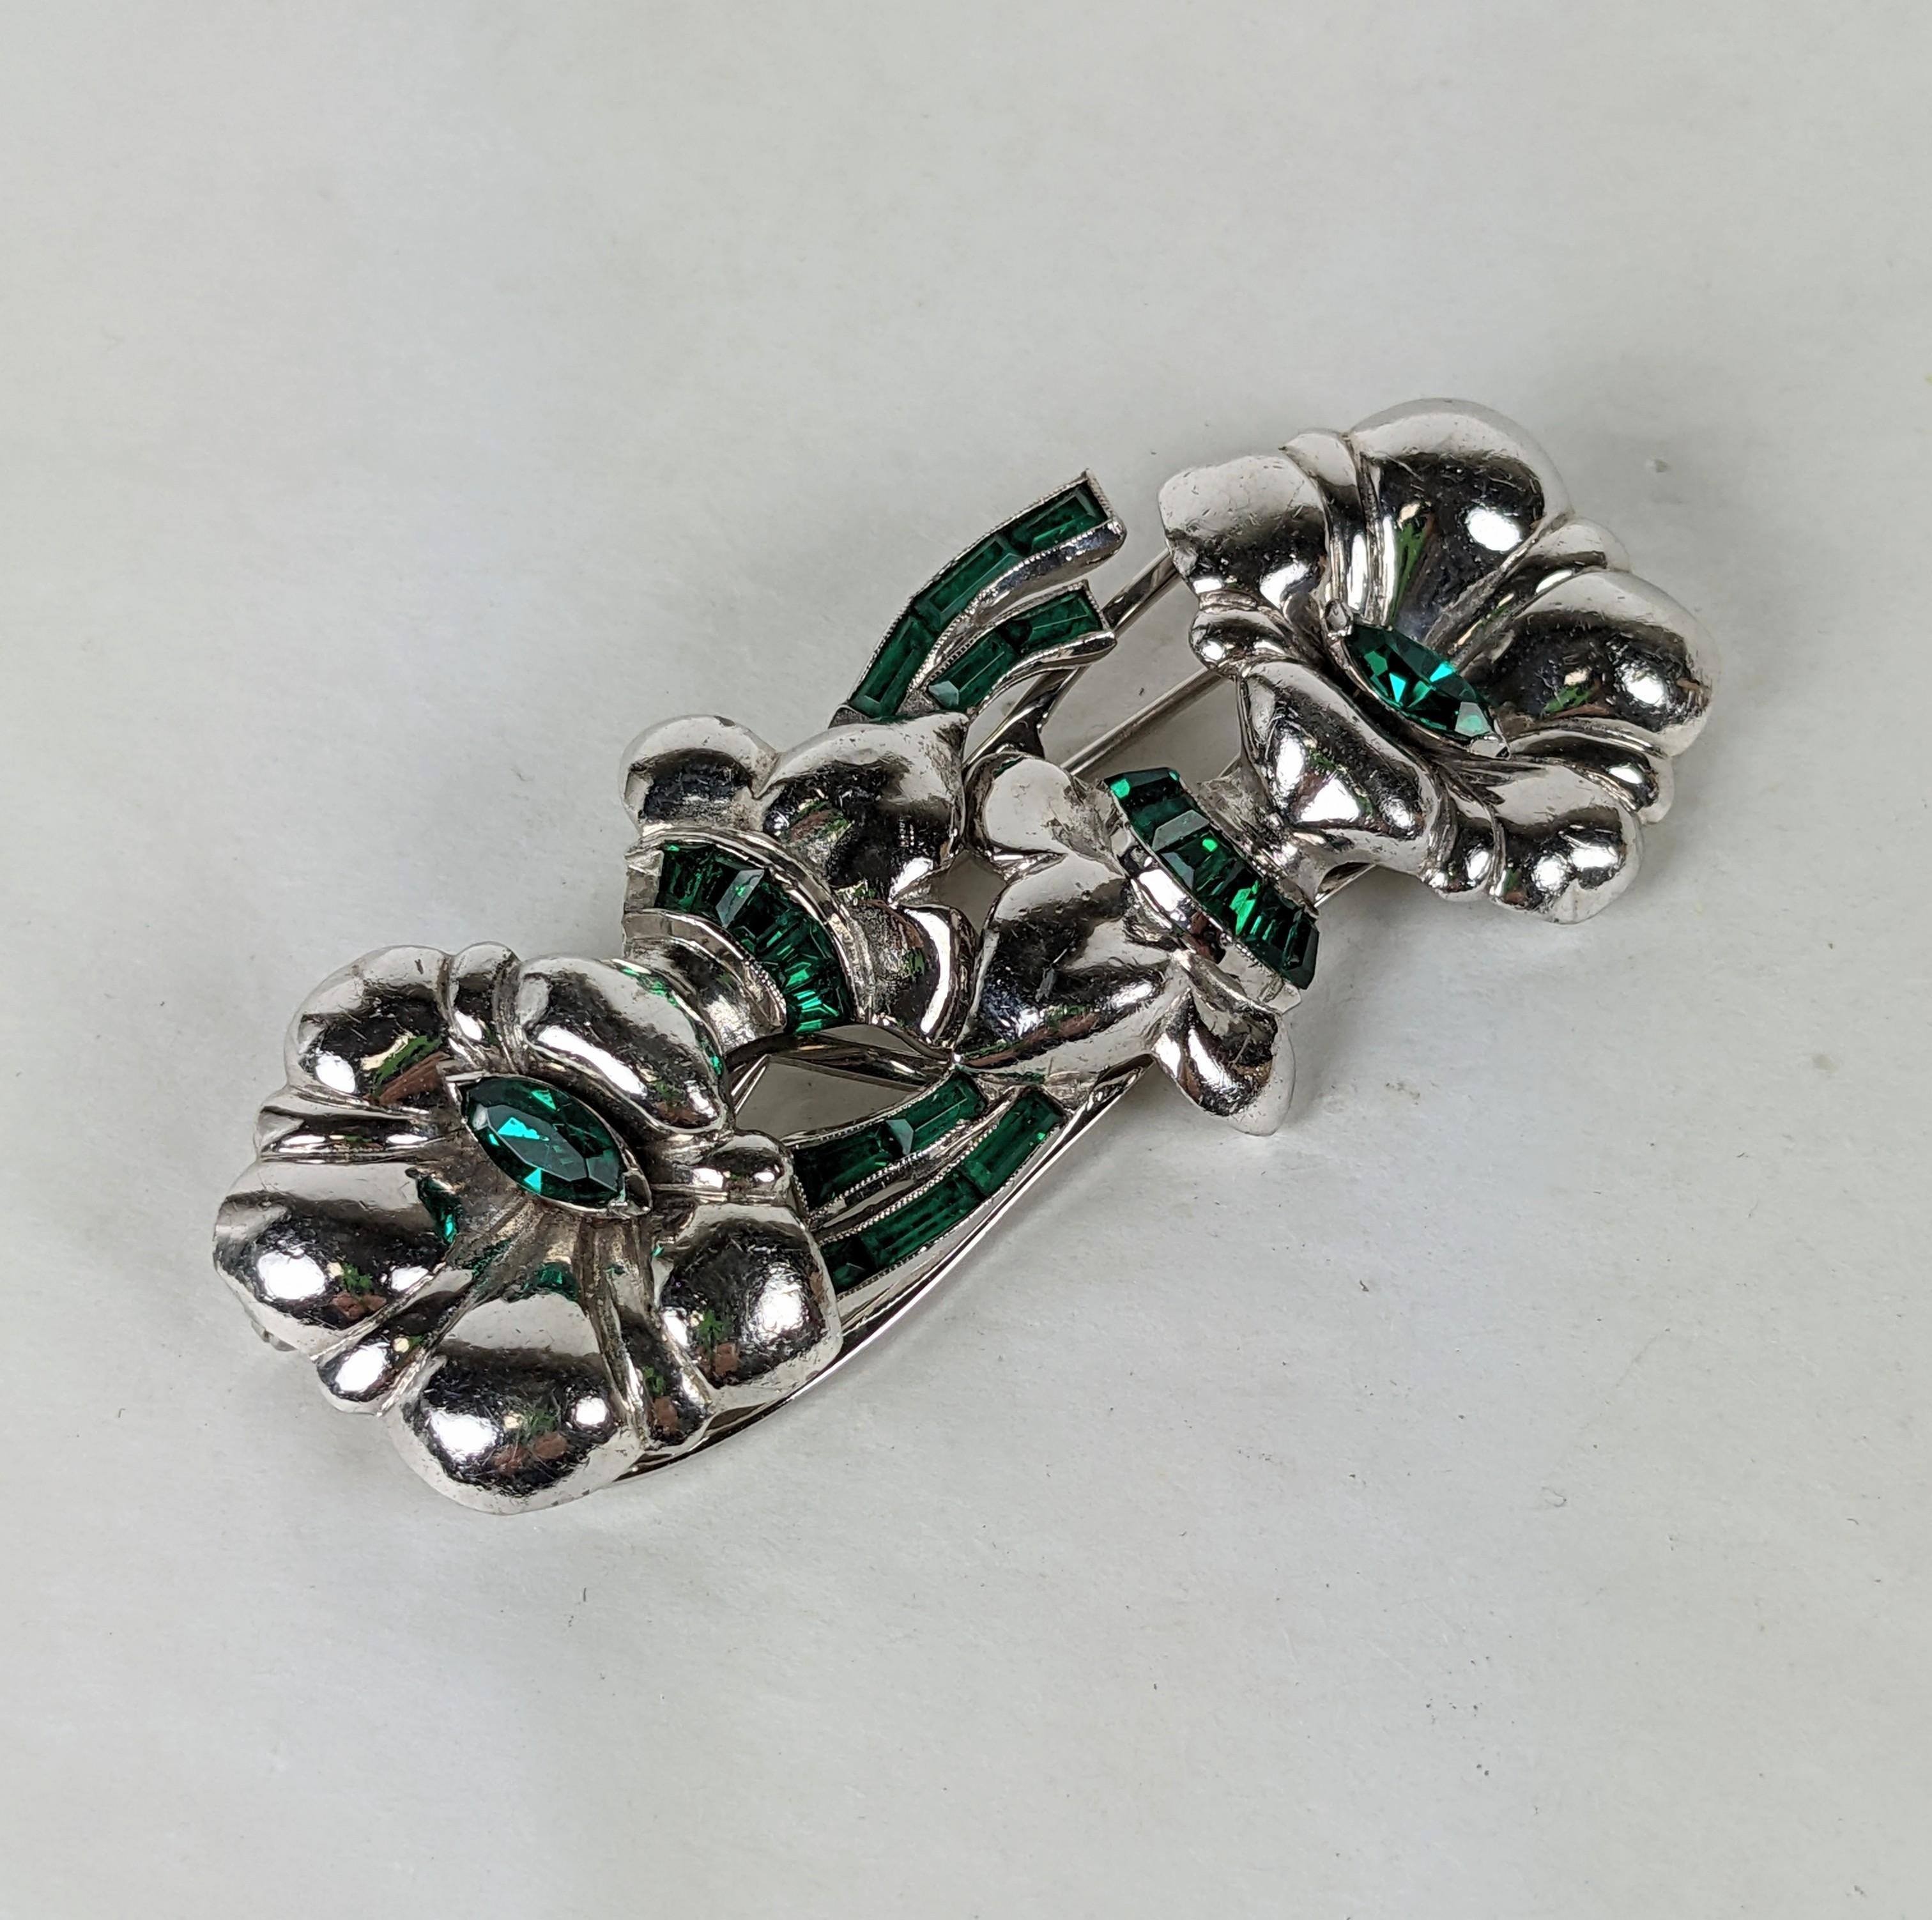 Unusual Coro Deco Flower Duette from the 1930's. Rhodium plated lily flower clips set with with green pastes. Both clips separate of backing and can be worn along a neckline or as a brooch.
2.75